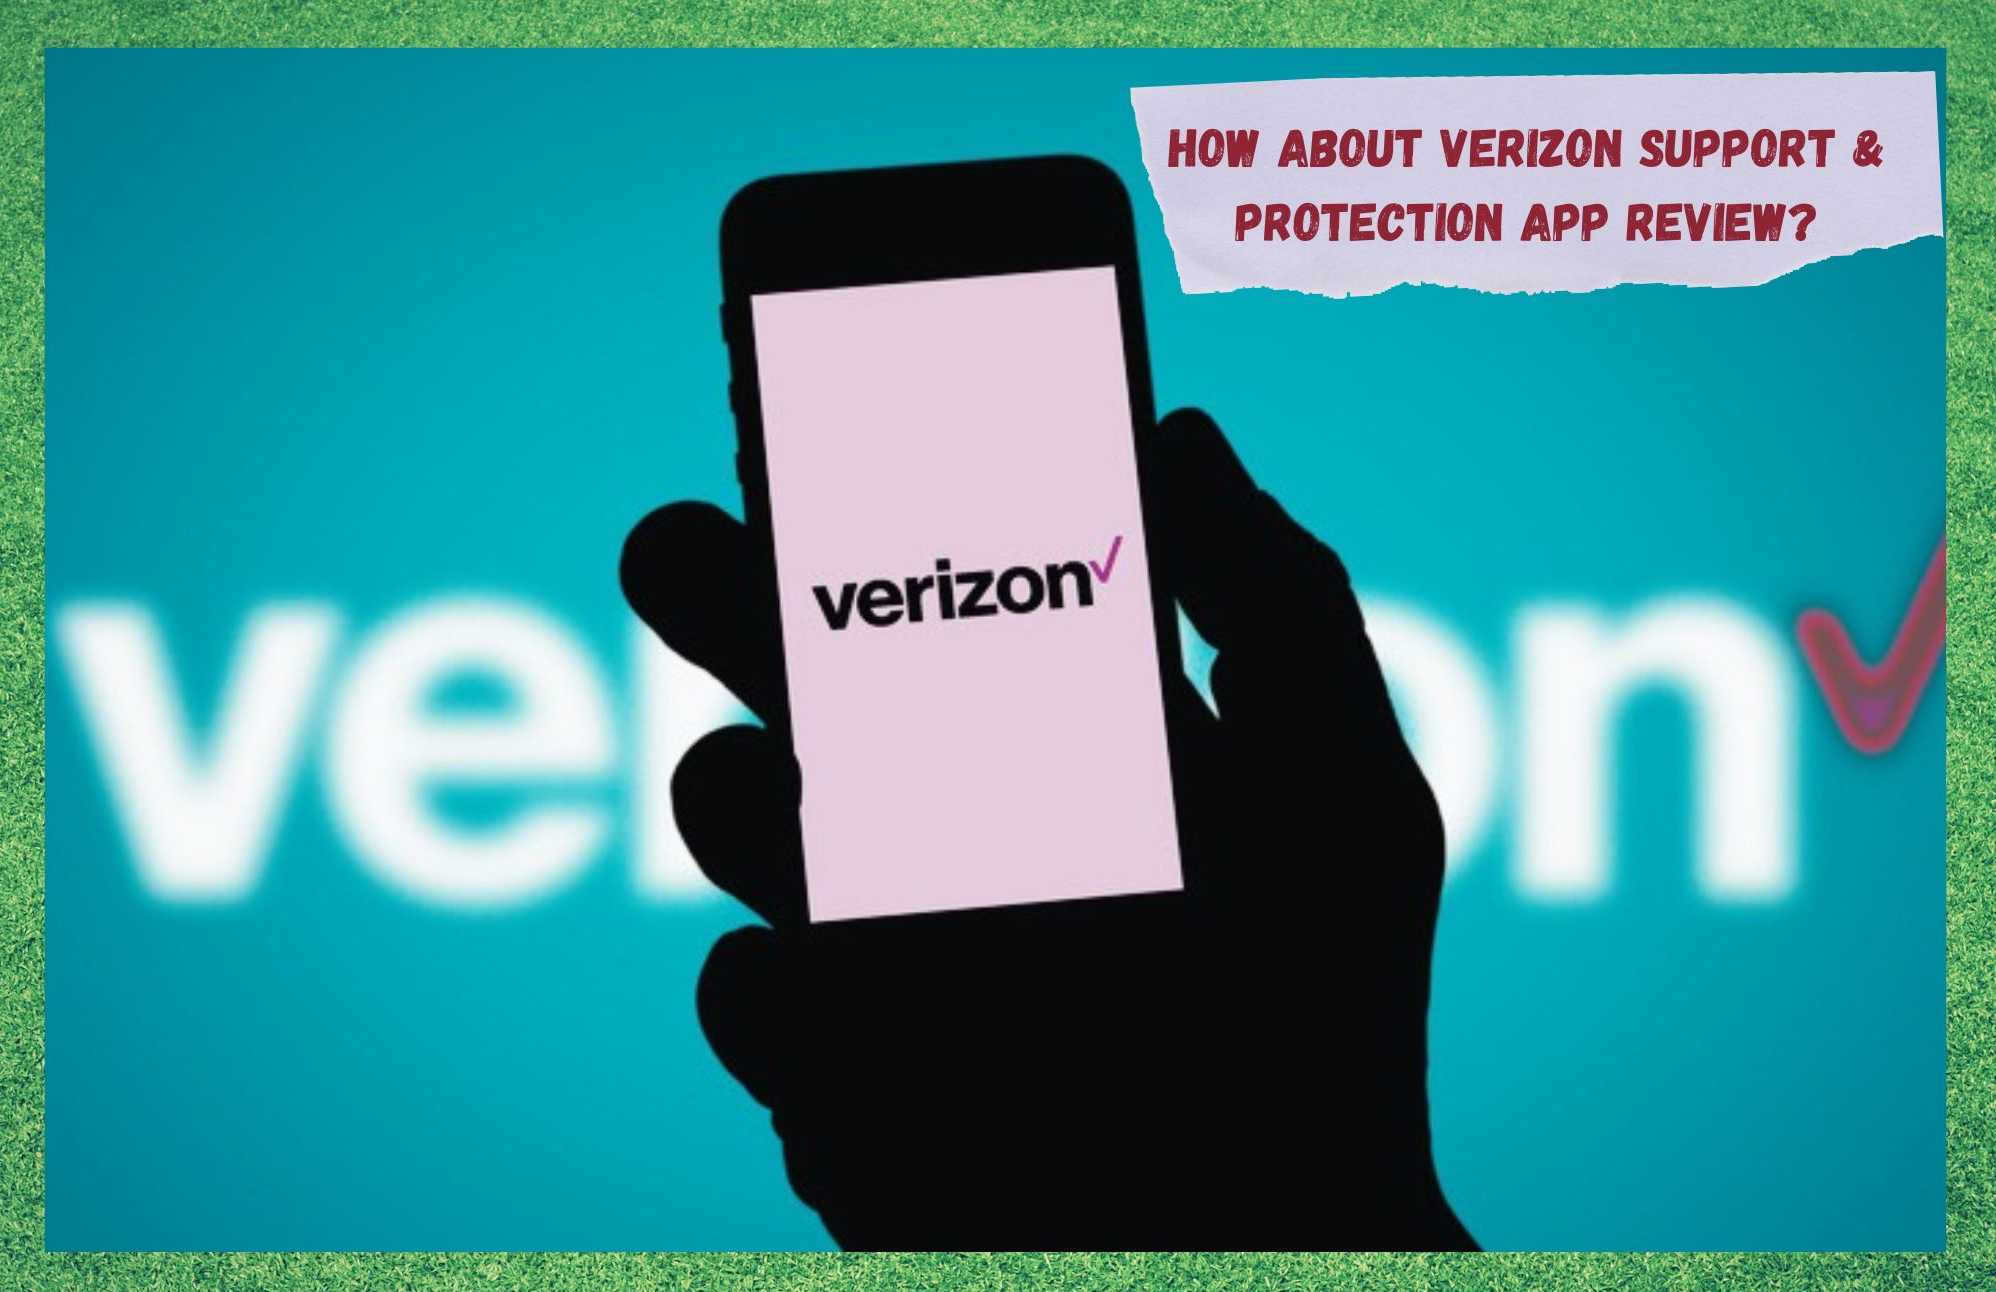 verizon support and protection app review